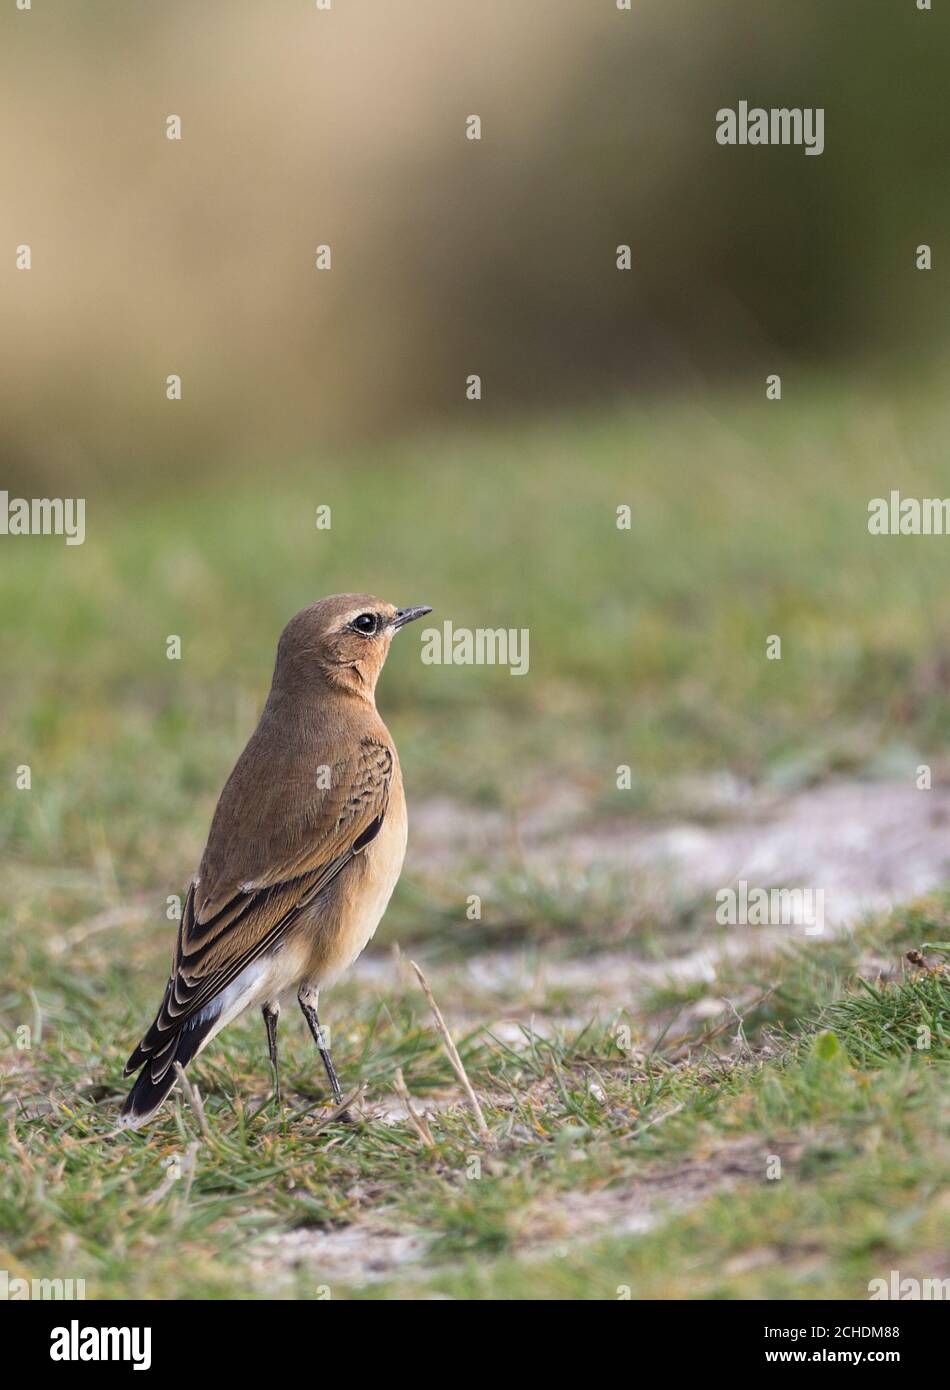 Wheatear Oenanthe oenanthe female migrant to UK sandy brown plumage black and white tail feathers pale stripe over eye wheat shape patch behind eye Stock Photo